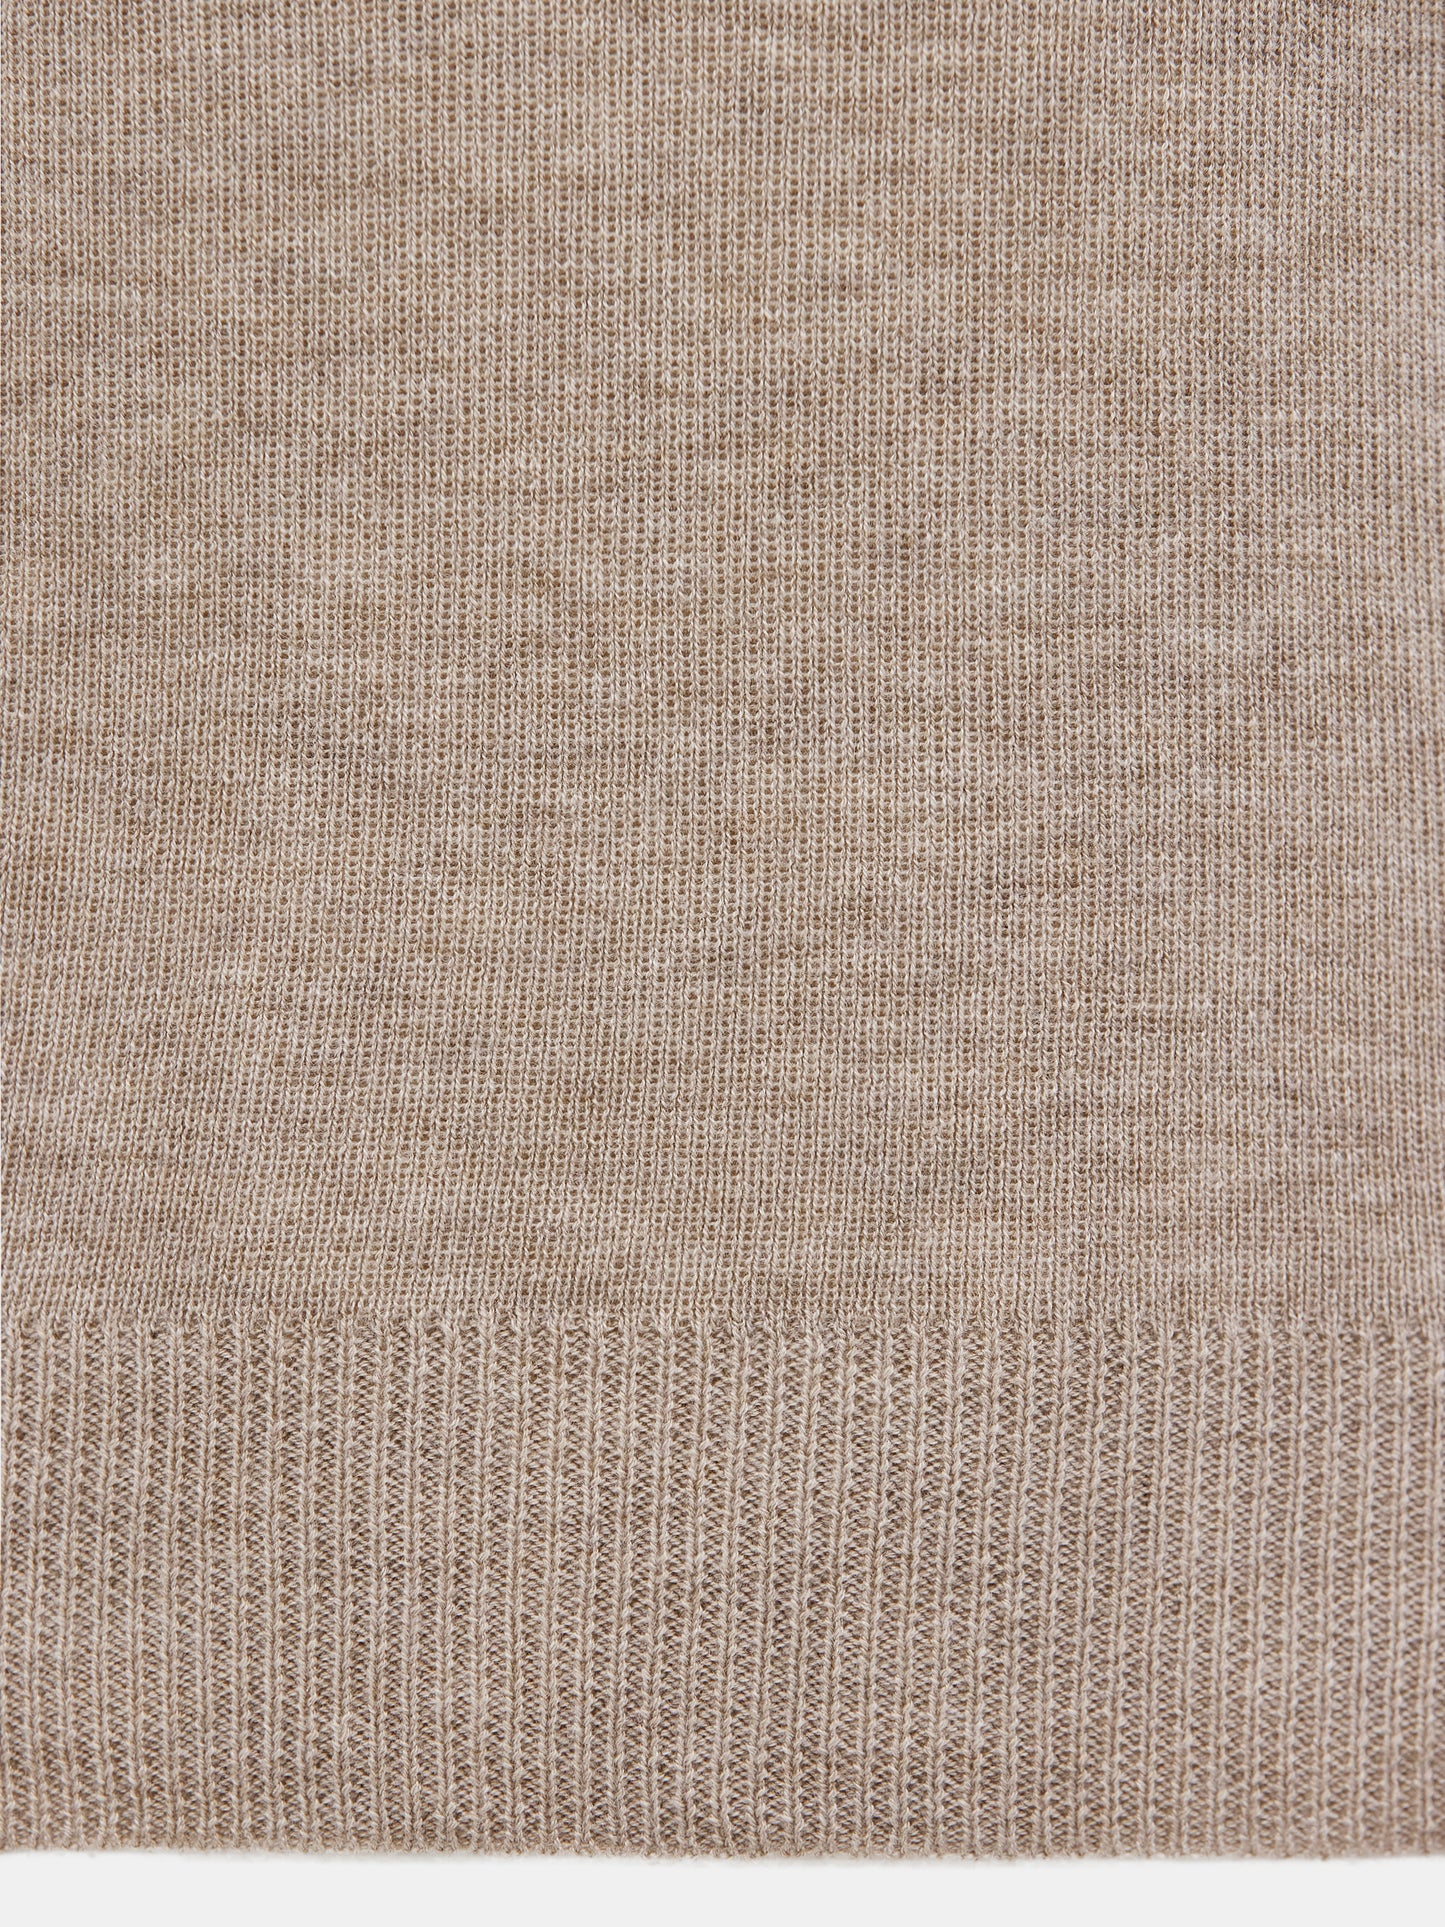 High-Neck Compact Knit, Beige